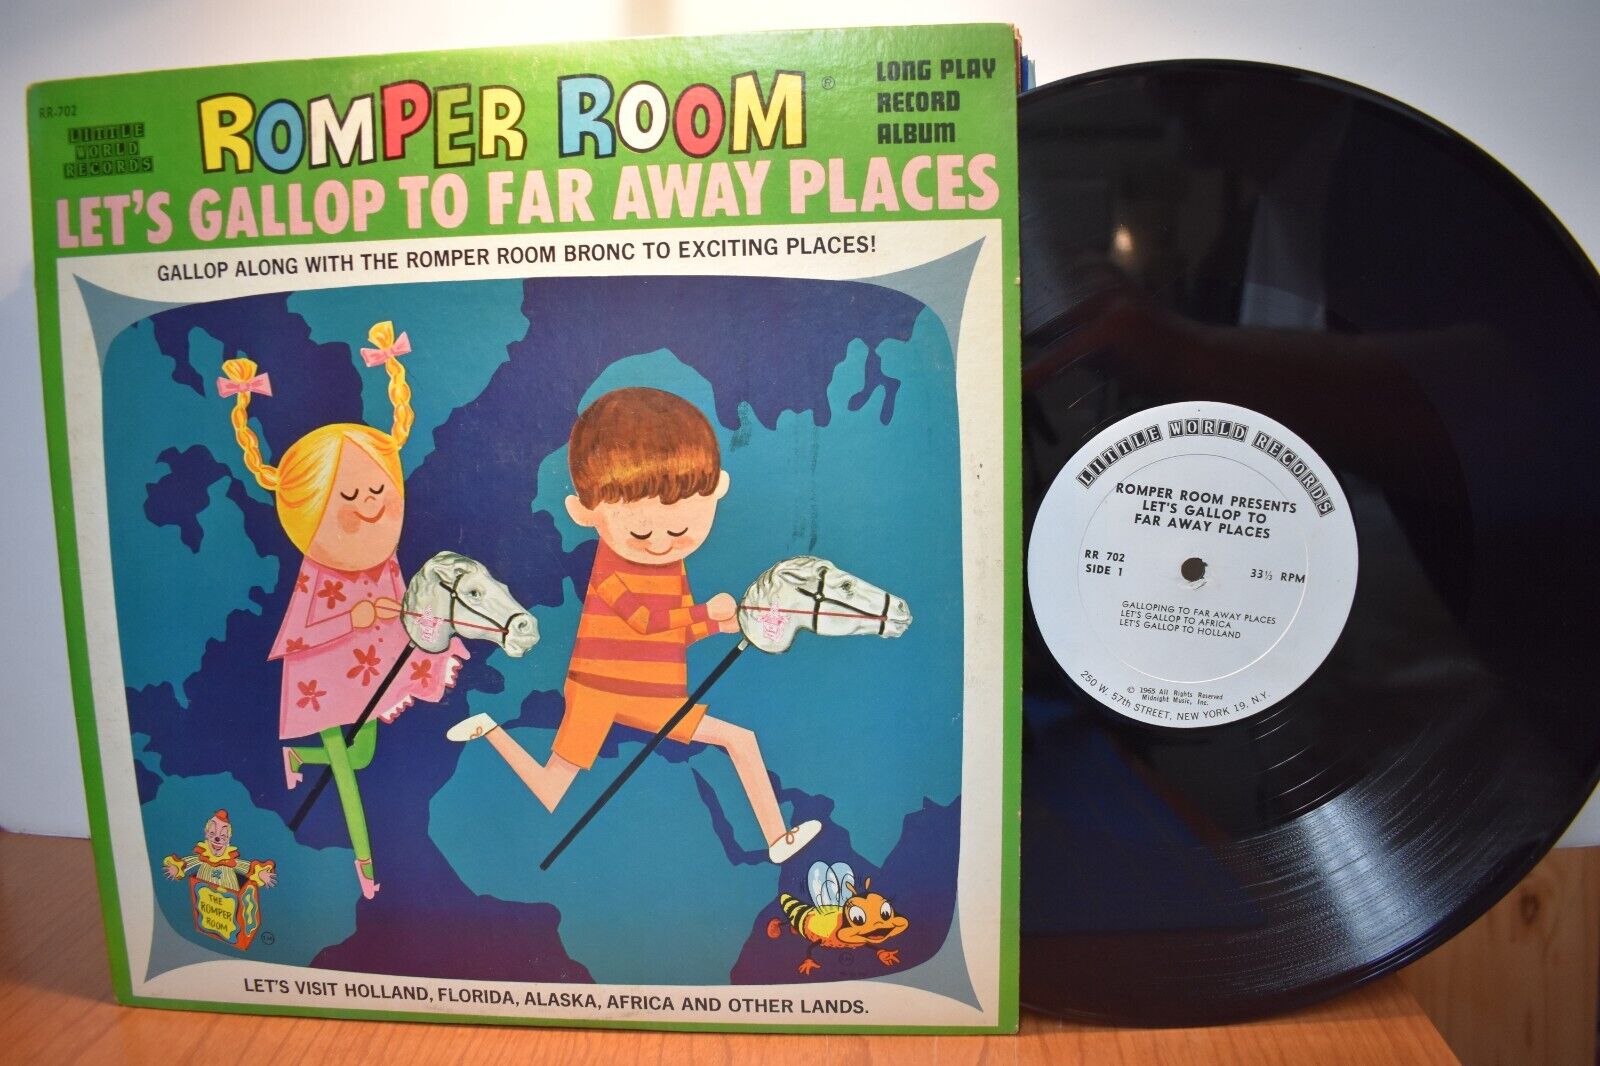 Romper Room Let’s Gallop to Far Away Places LP Little World Records RR 702 Mono